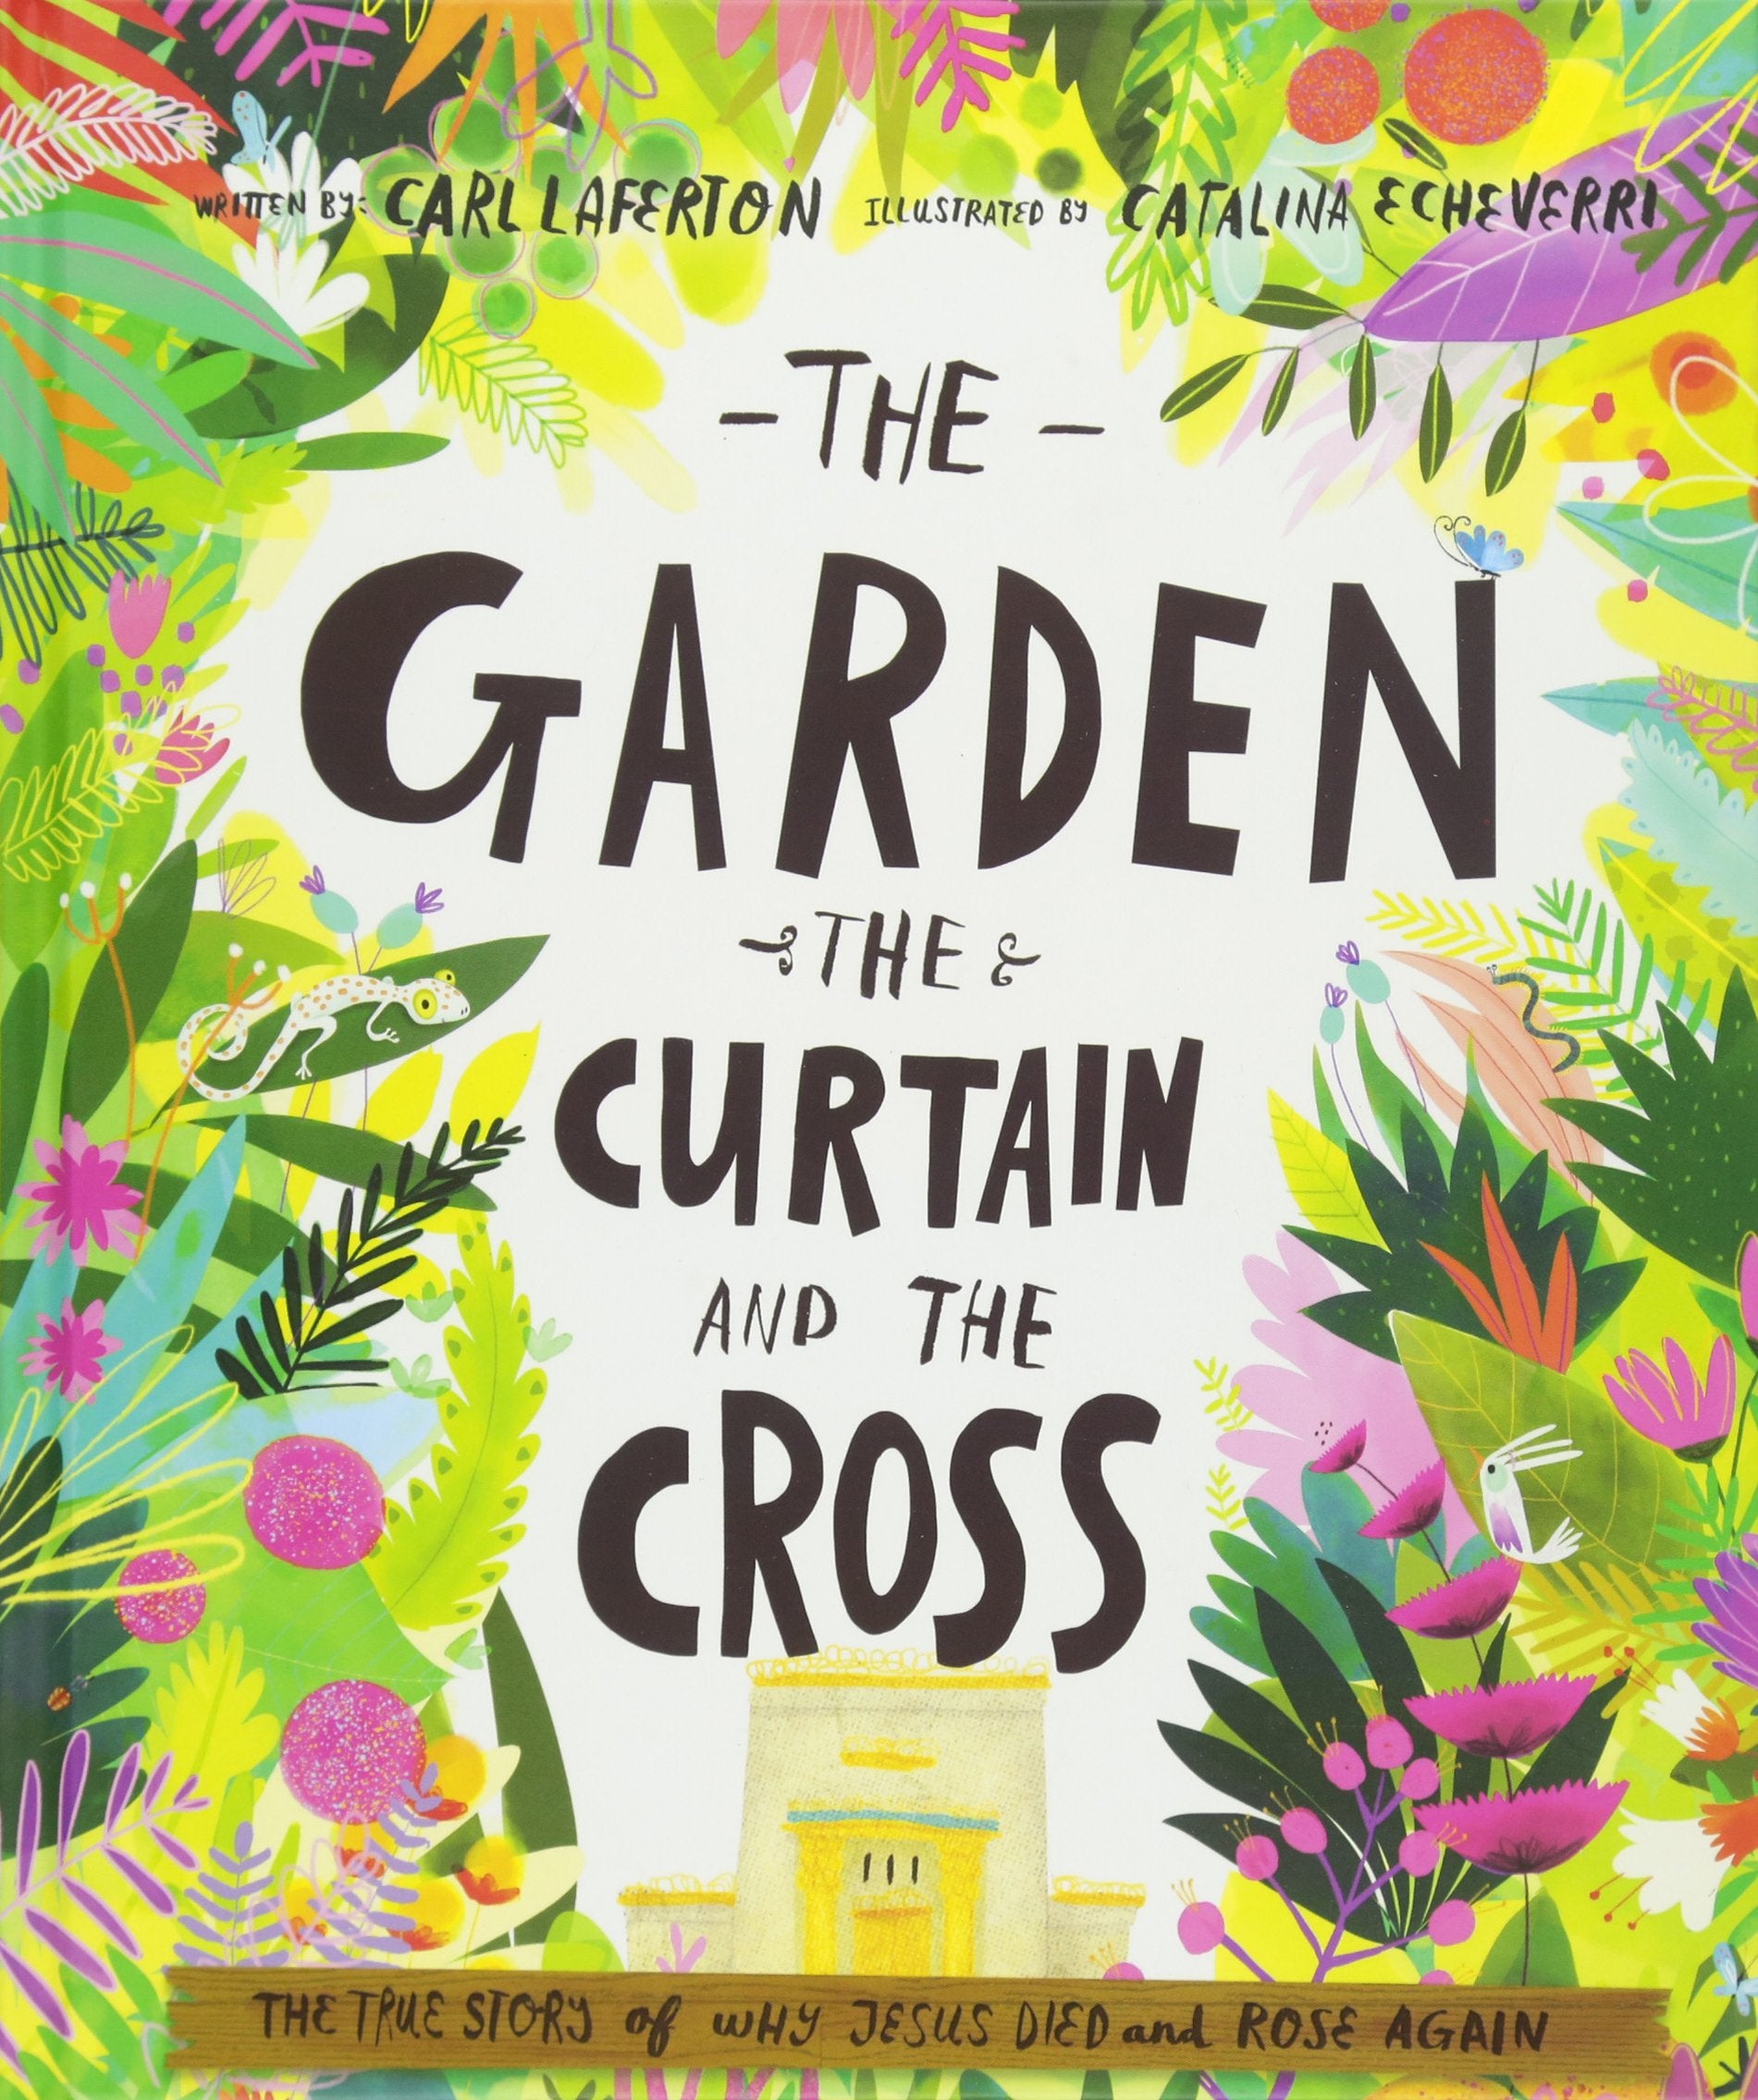 The Garden, the Curtain and the Cross Storybook: The True Story of Why Jesus Died and Rose Again - SureShot Books Publishing LLC